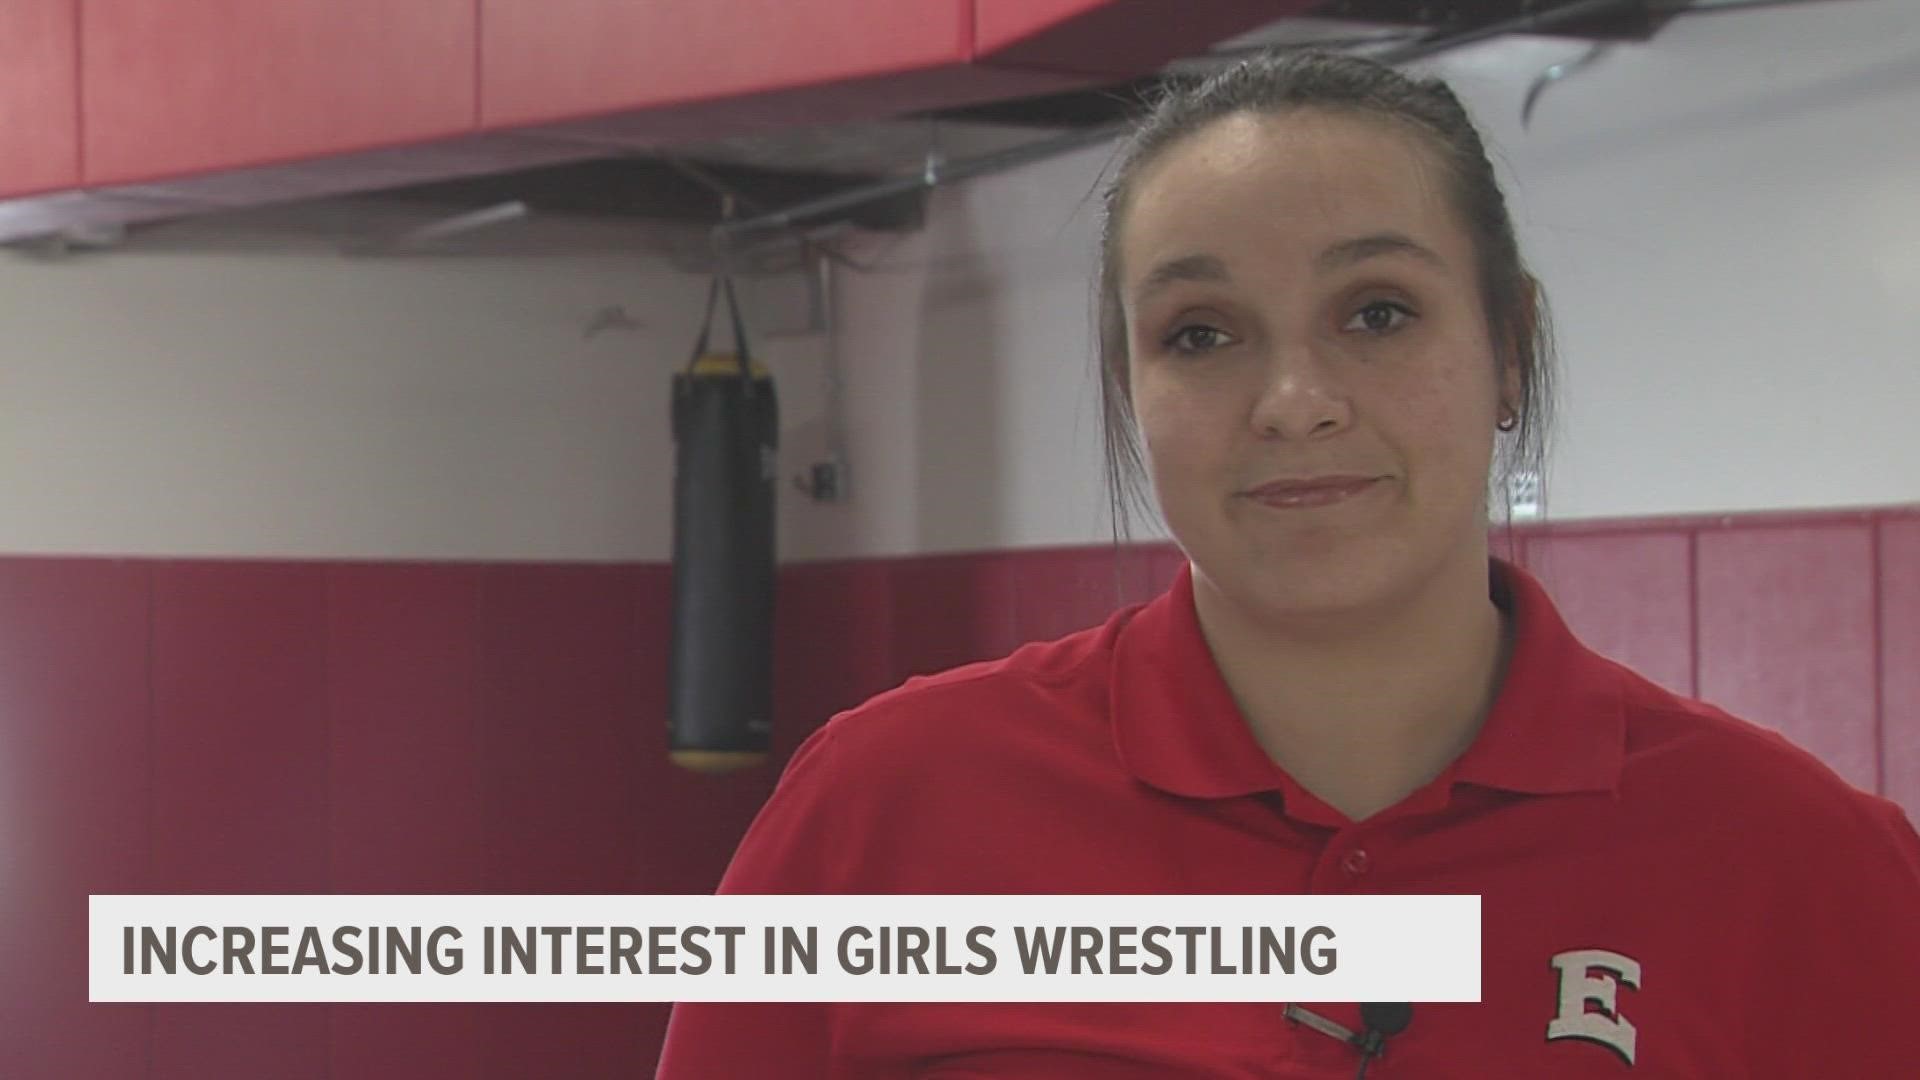 Samantha Bush will lead the girls wrestling program as head coach, rotating between schools to work with participating students.